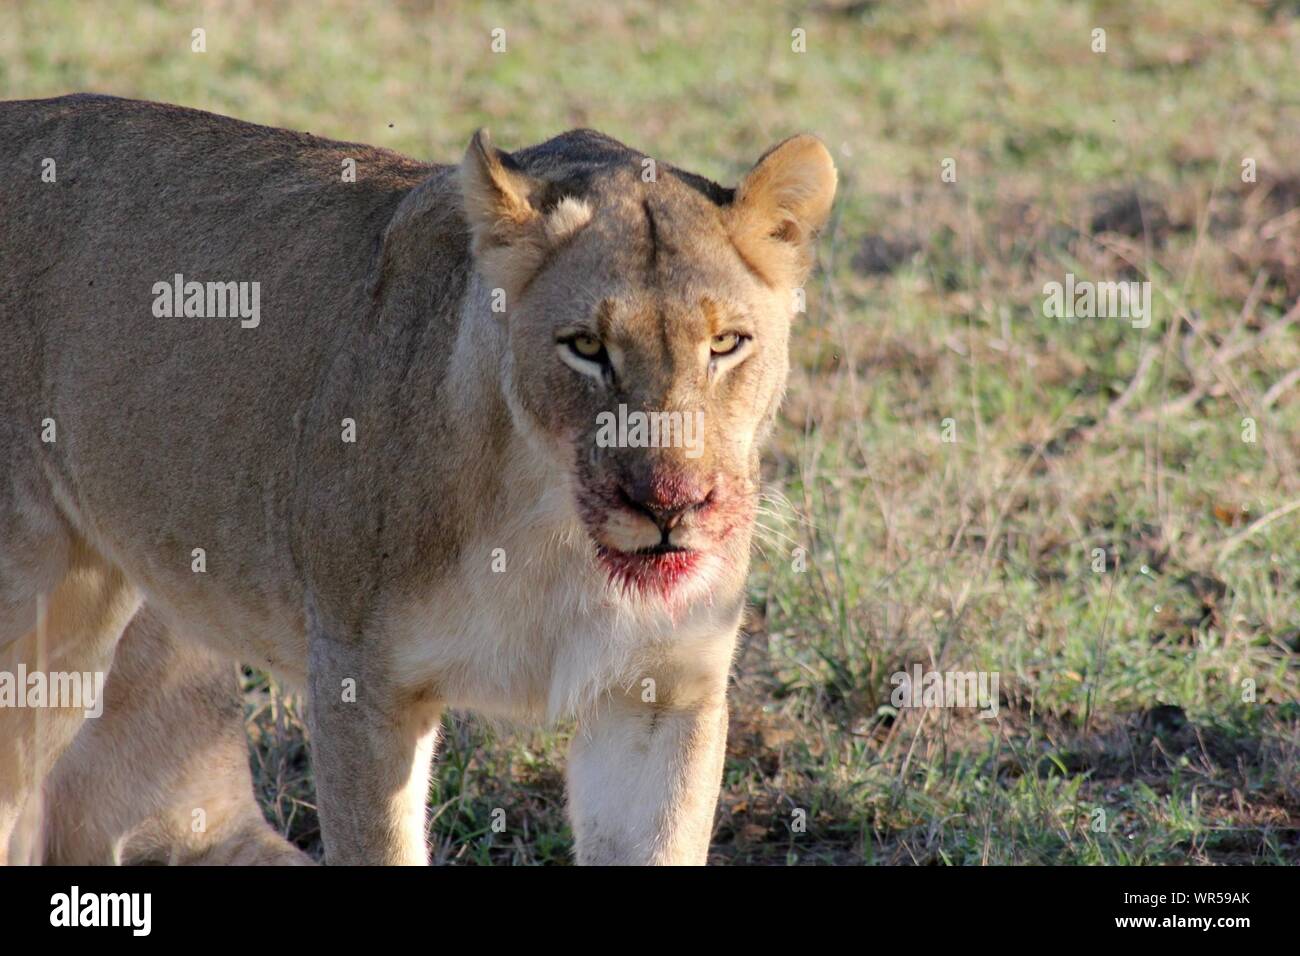 Portrait Of Lioness With Bloodied Mouth On Field Stock Photo